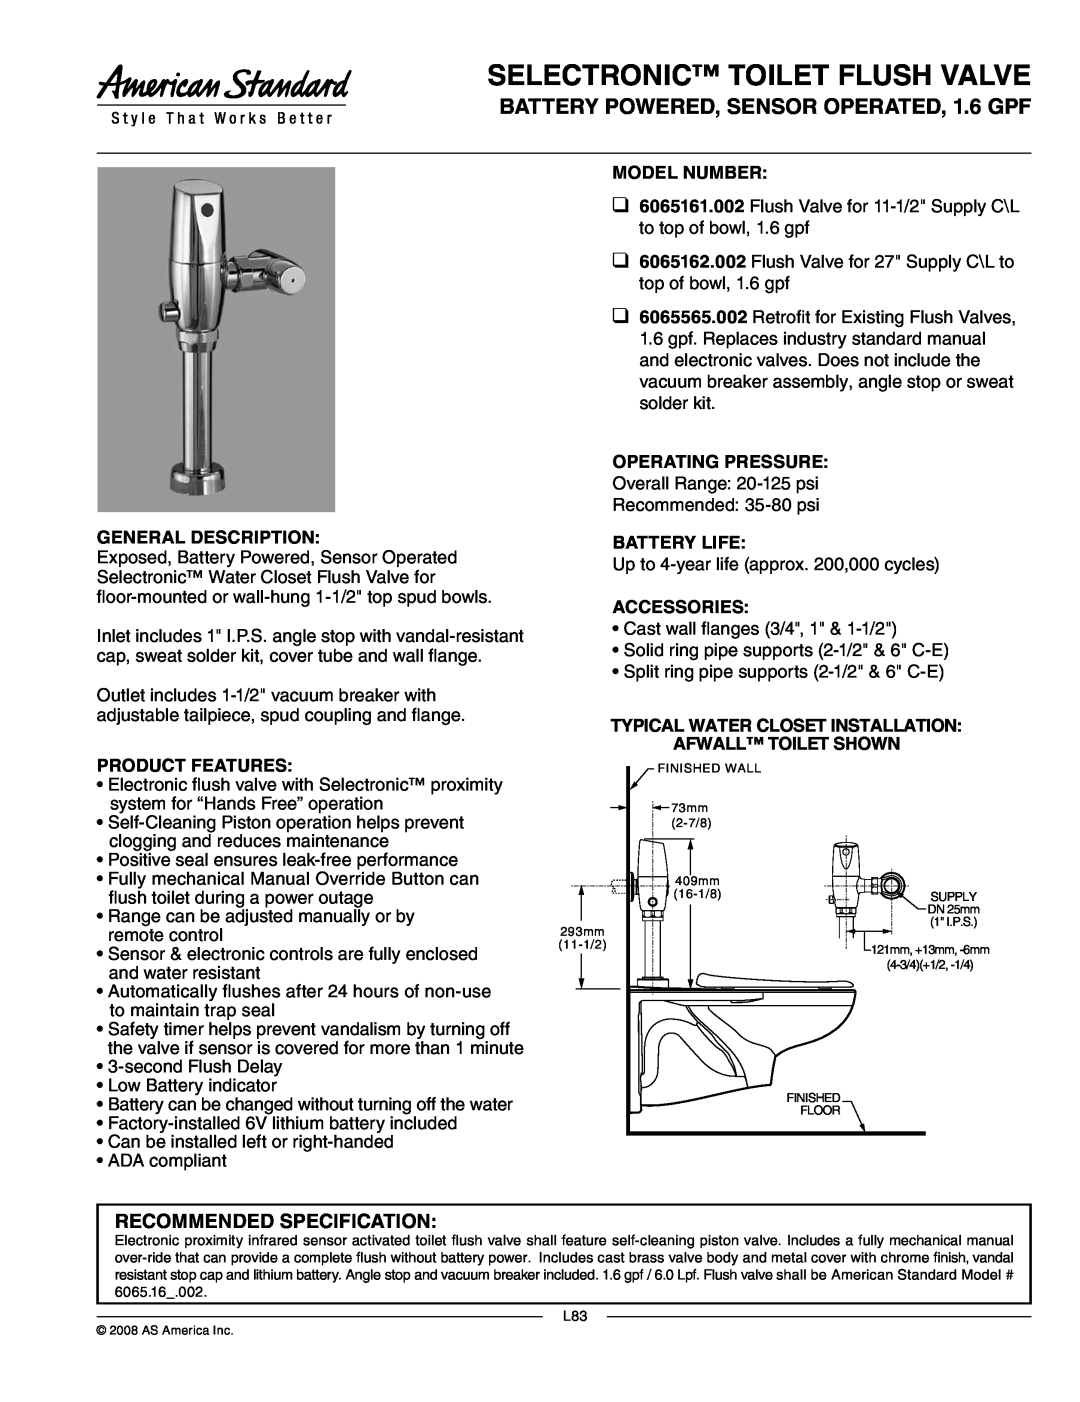 American Standard 6065161.002 manual Selectronic Toilet Flush Valve, Recommended Specification, General Description 